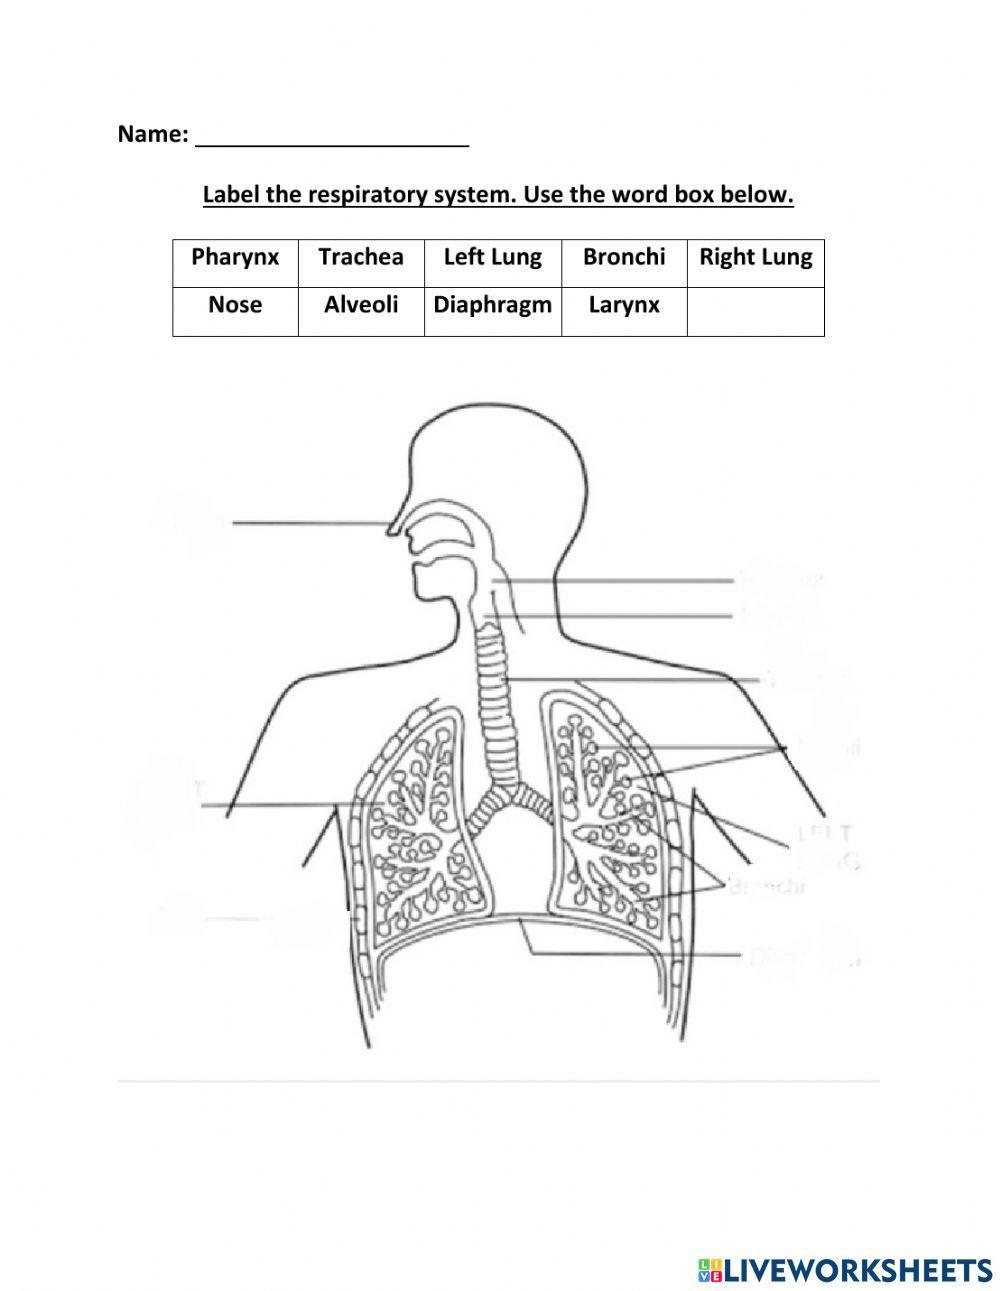 Label the Respiratory System